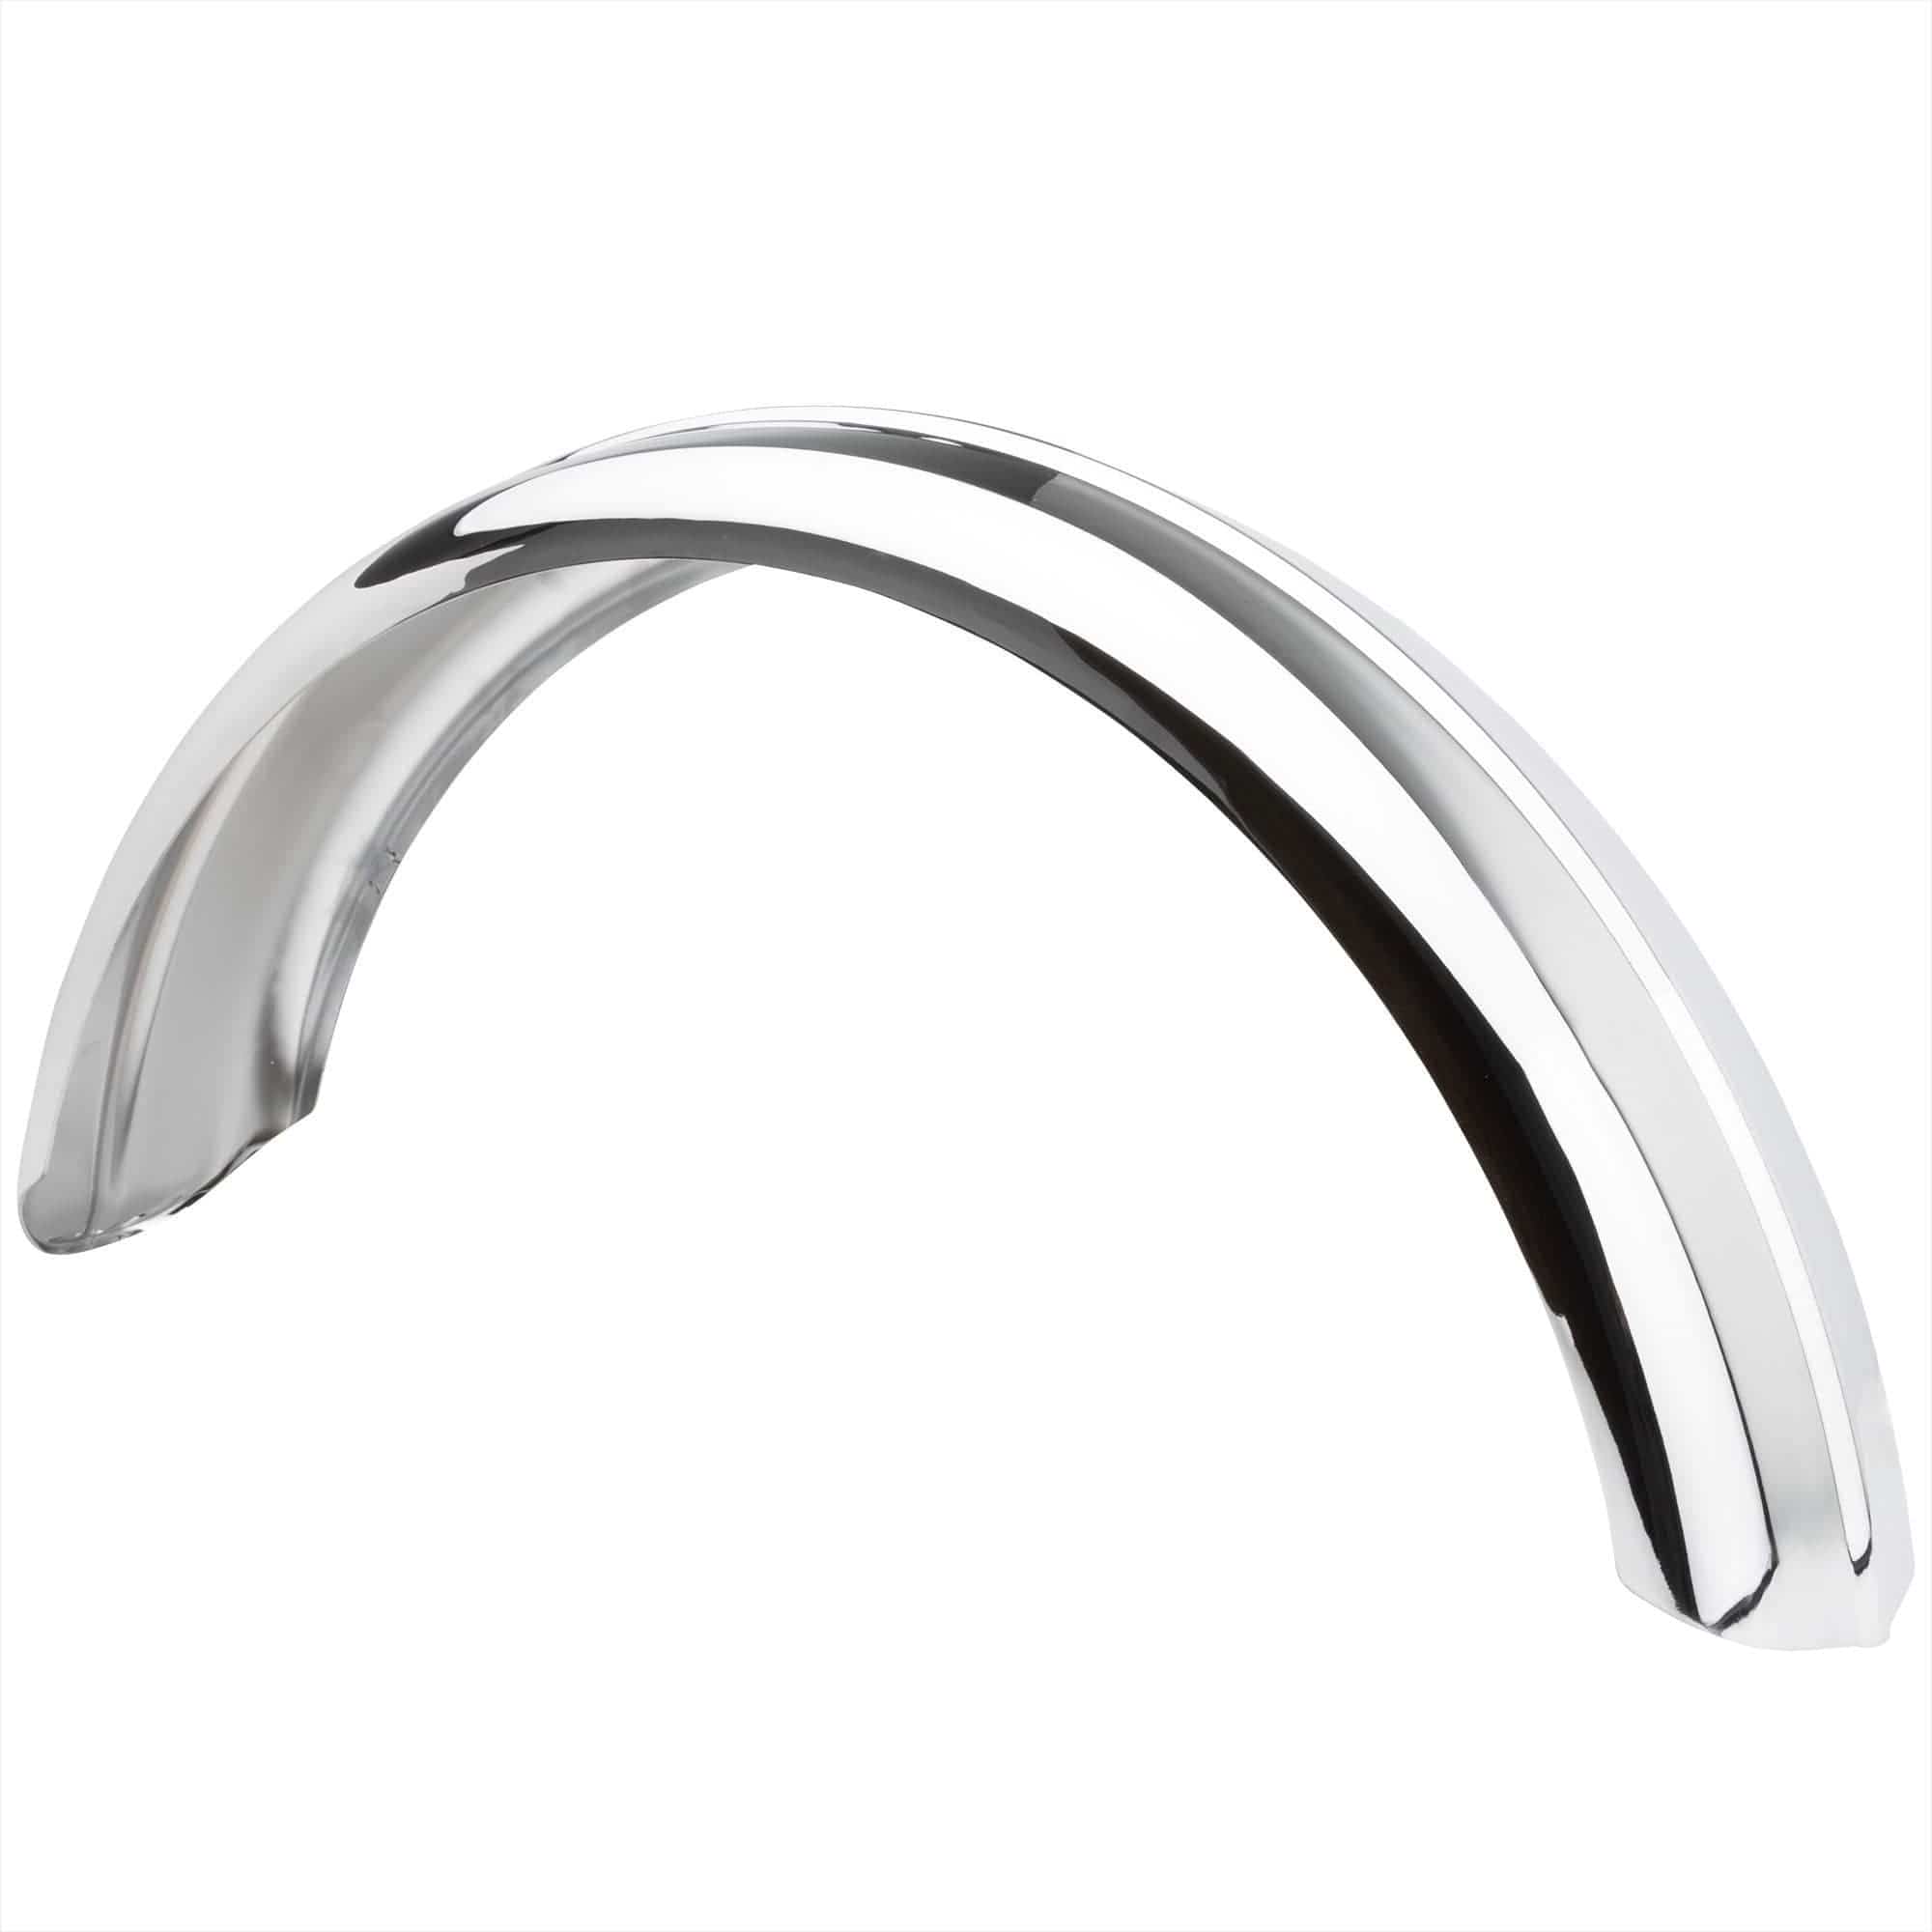 Cycle Standard Ribbed Chrome Steel Fender 5 inch Width – Lowbrow Customs